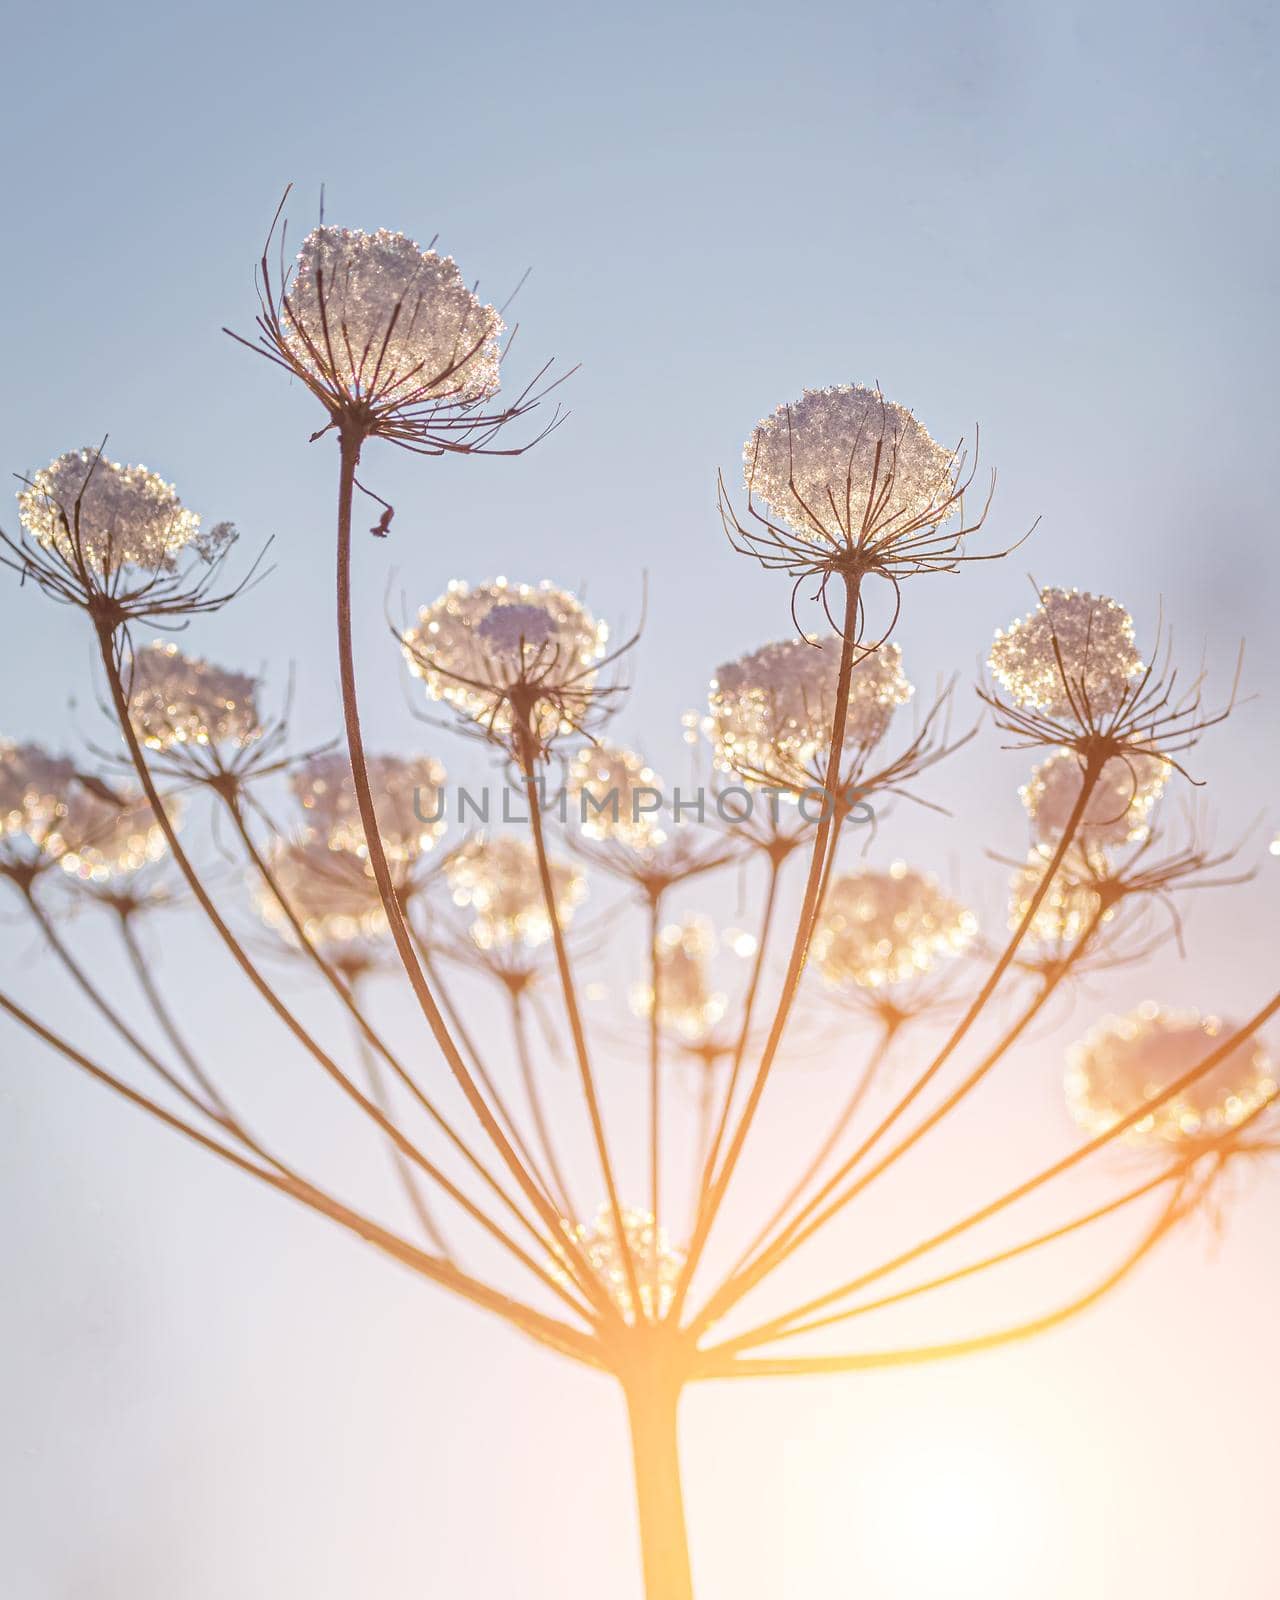 Dried flowers covered with snow and frost and illuminated by the sun at sunrise or sunset in winter.